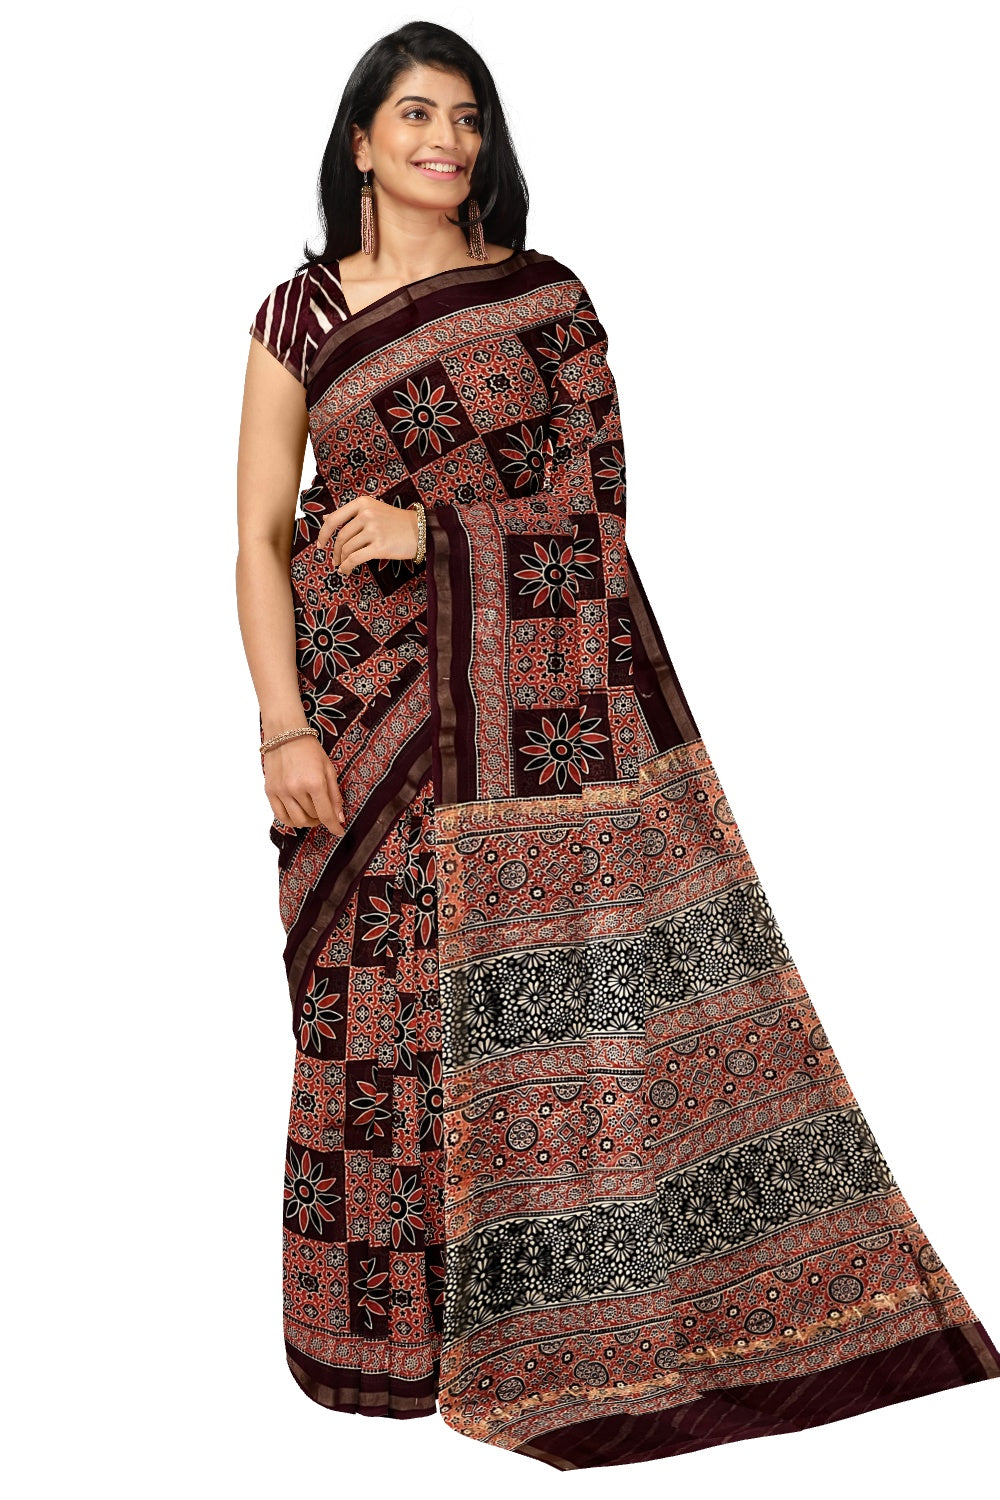 Southloom Cotton Purple and Red Saree with Ajrakh Printed Pallu